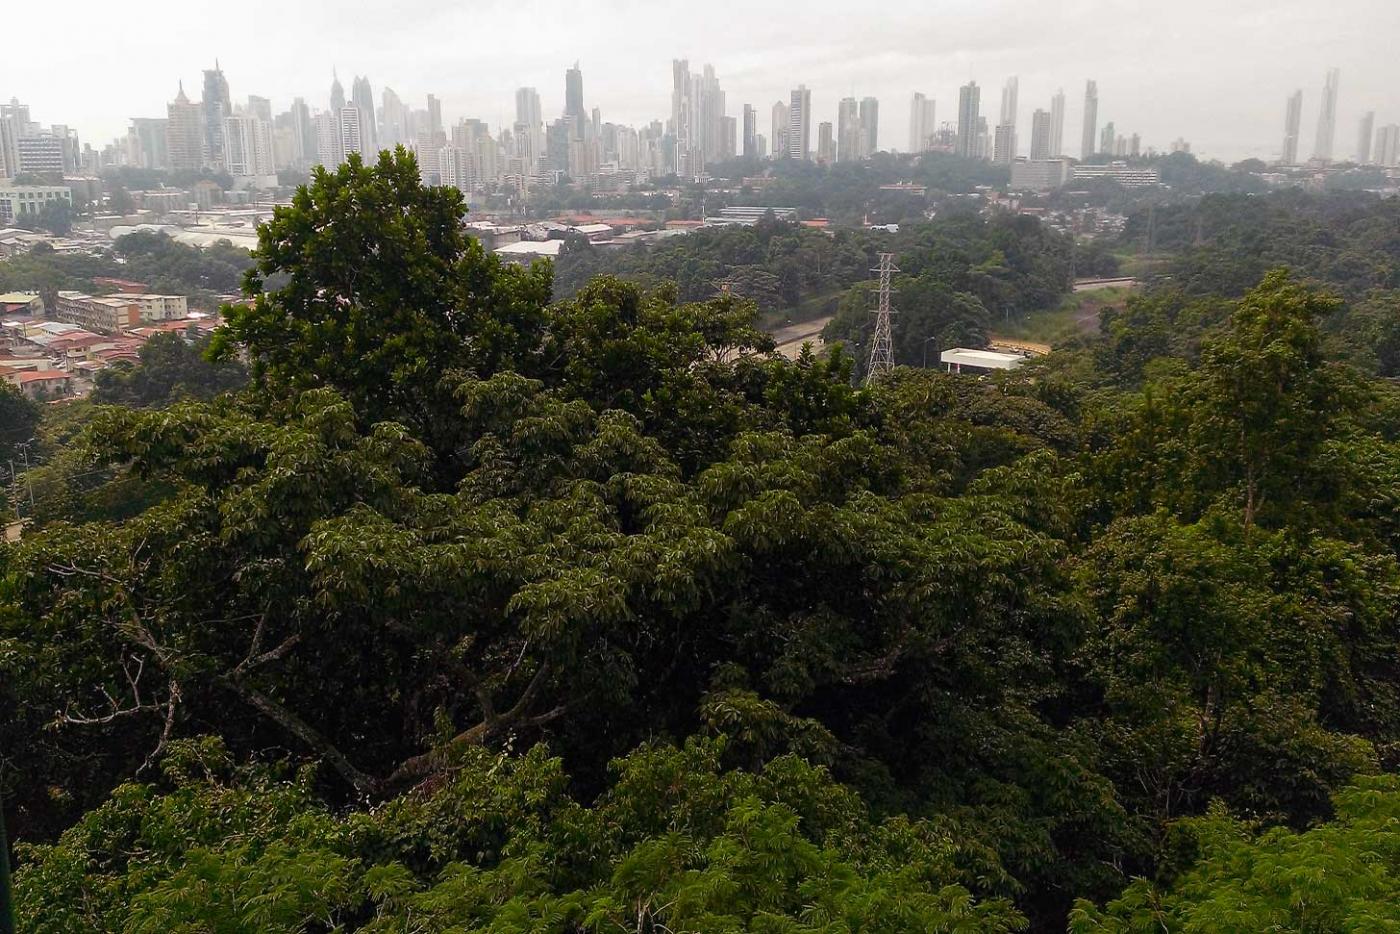  Aerial view of the tropical forest of Parque Metropolitano and downtown Panama City.